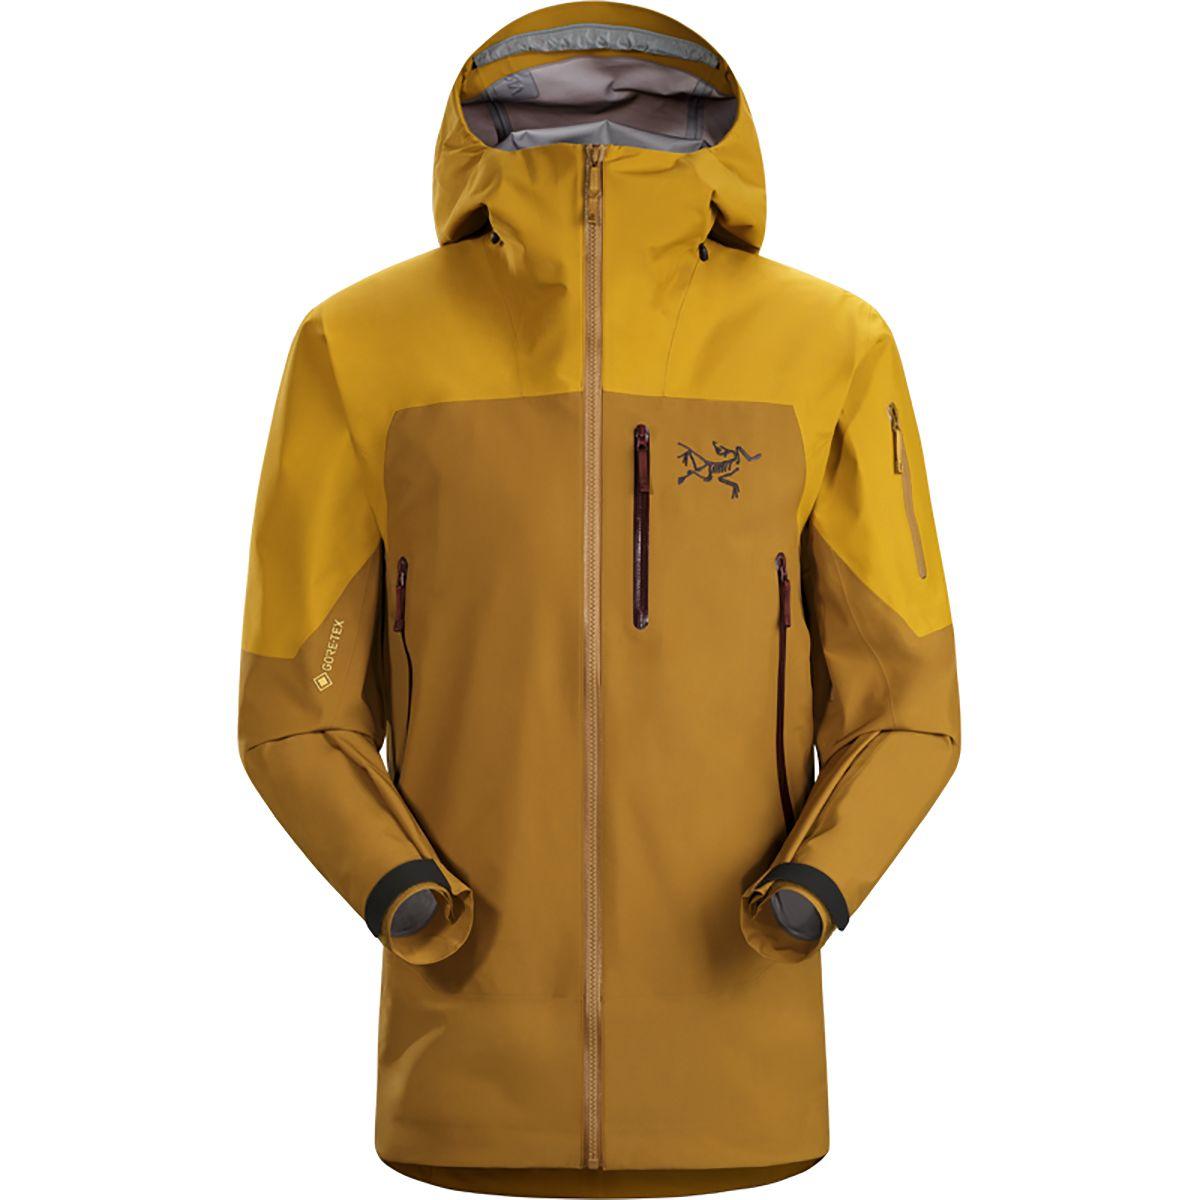 Arc'teryx Sabre Lt Jacket in Yellow for Men - Lyst